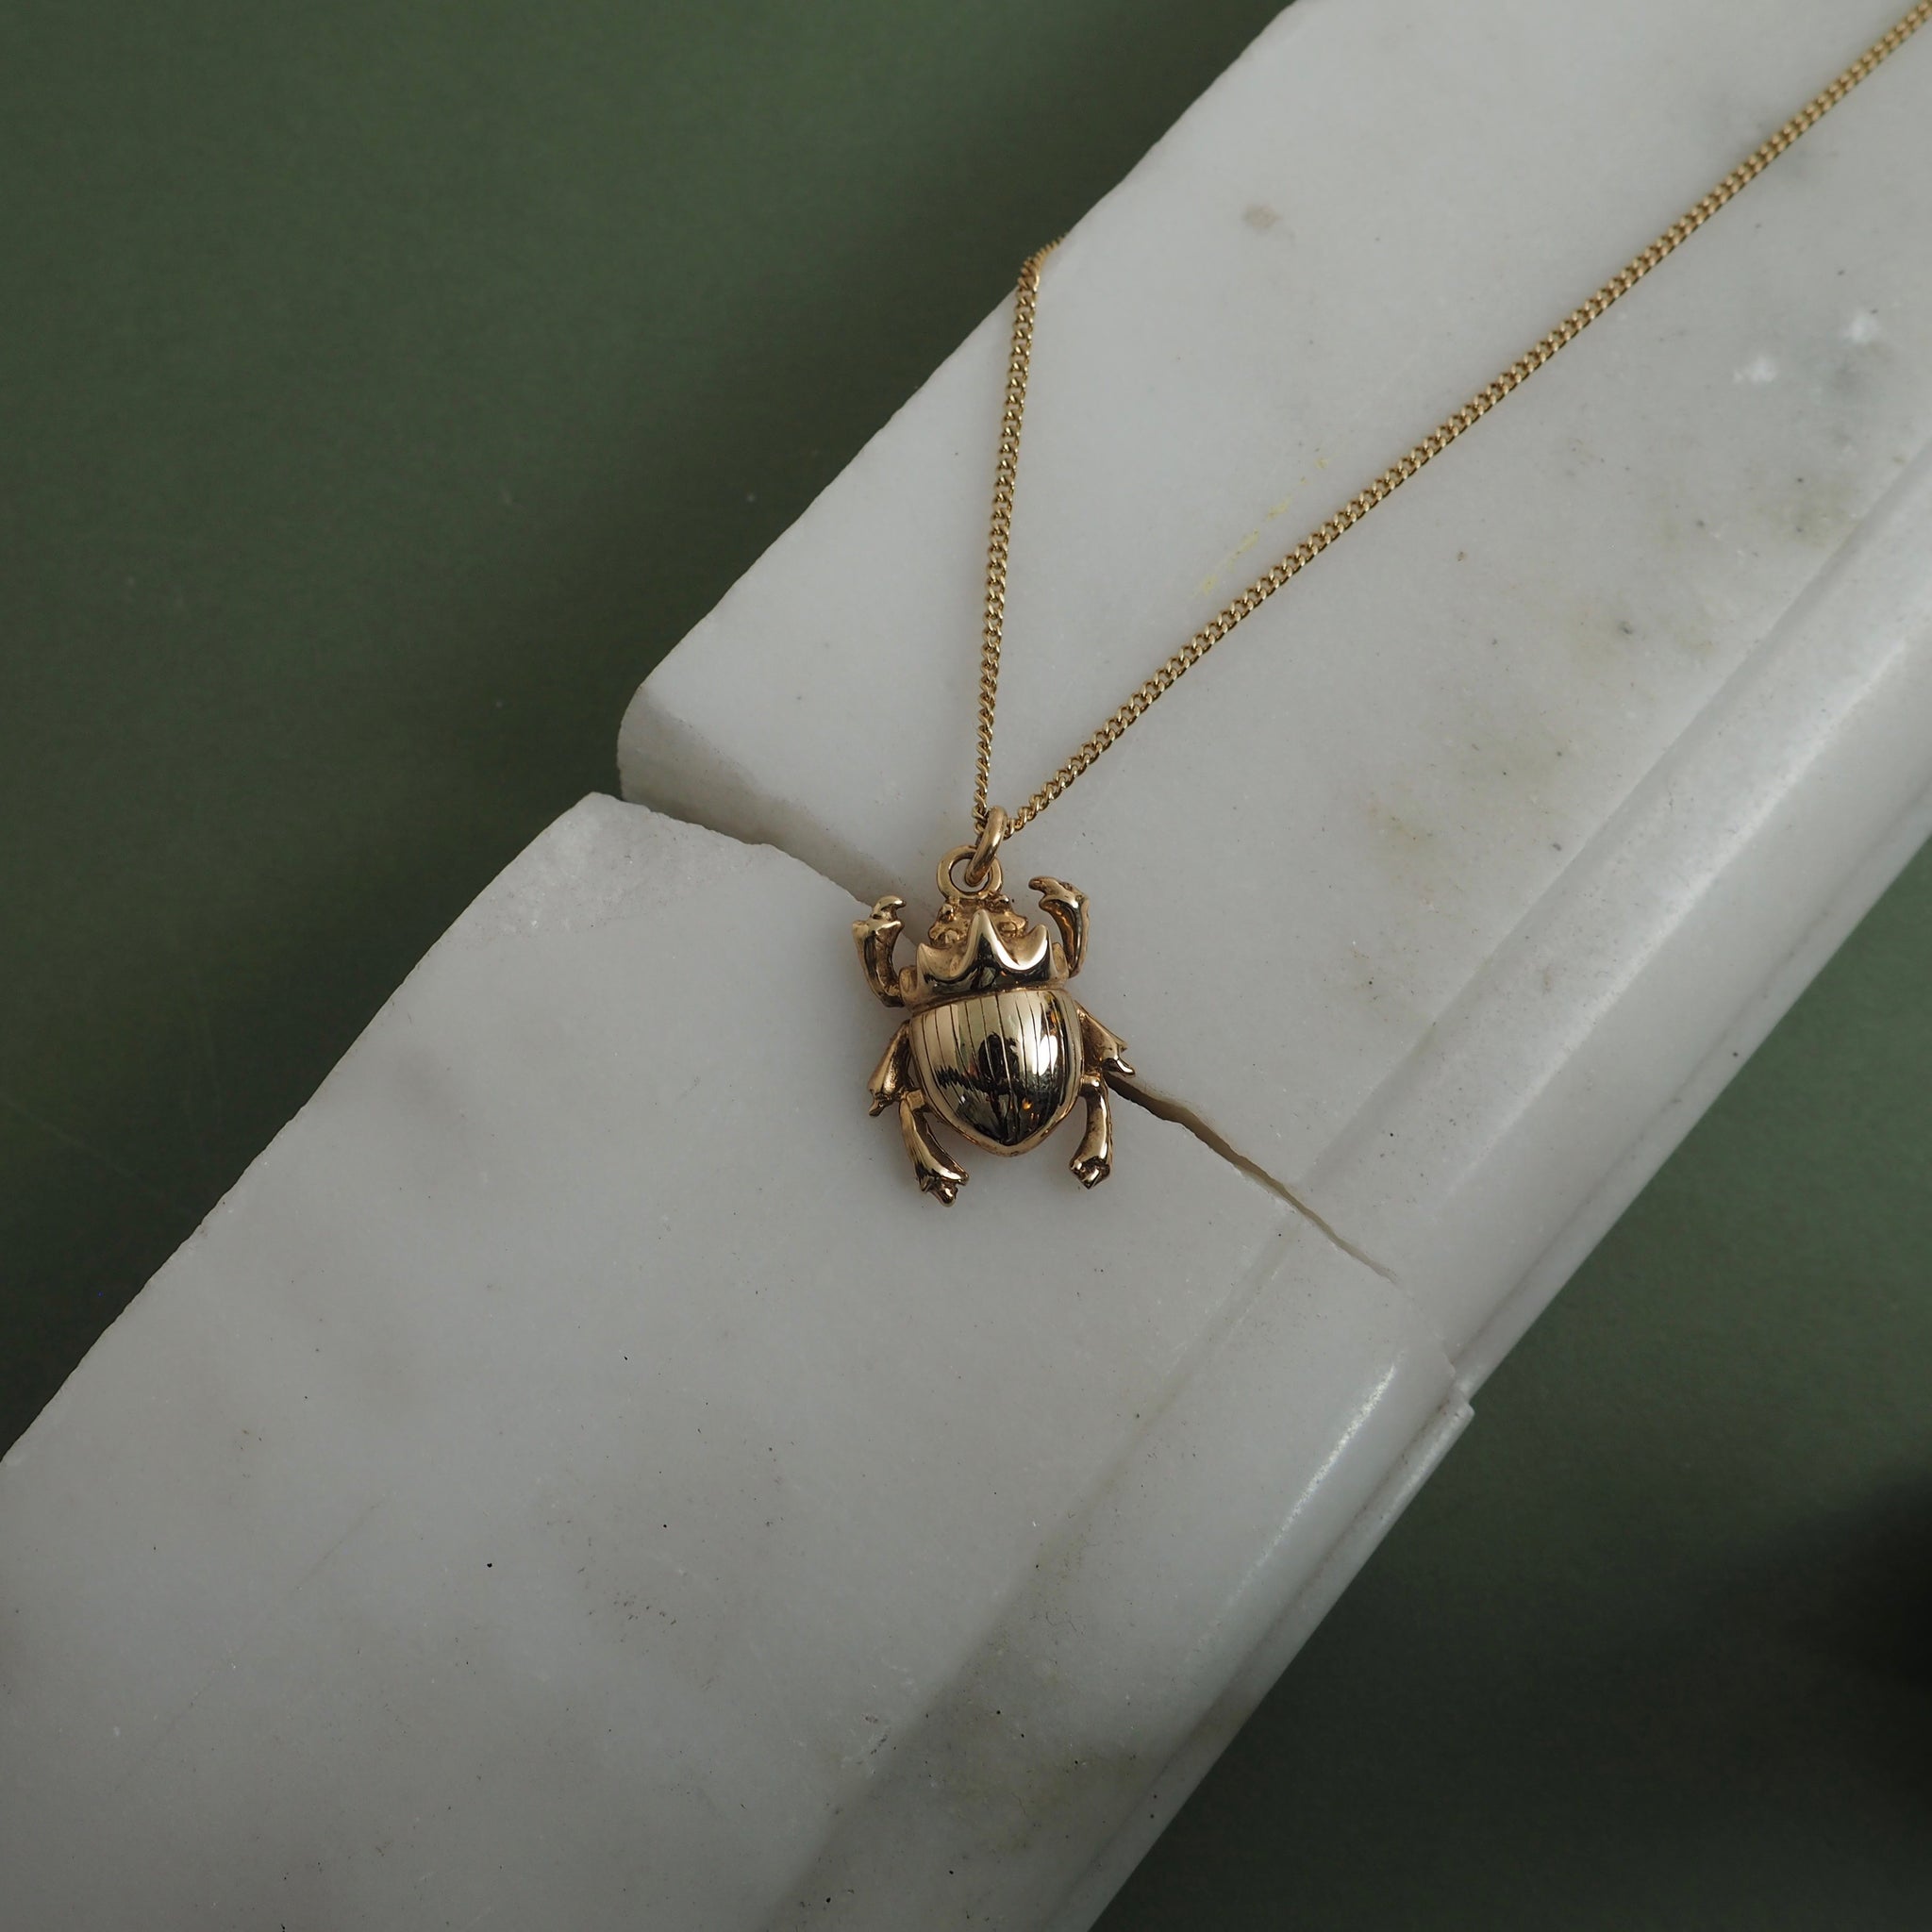 9ct Gold Little Scarab Beetle Necklace by Yasmin Everley